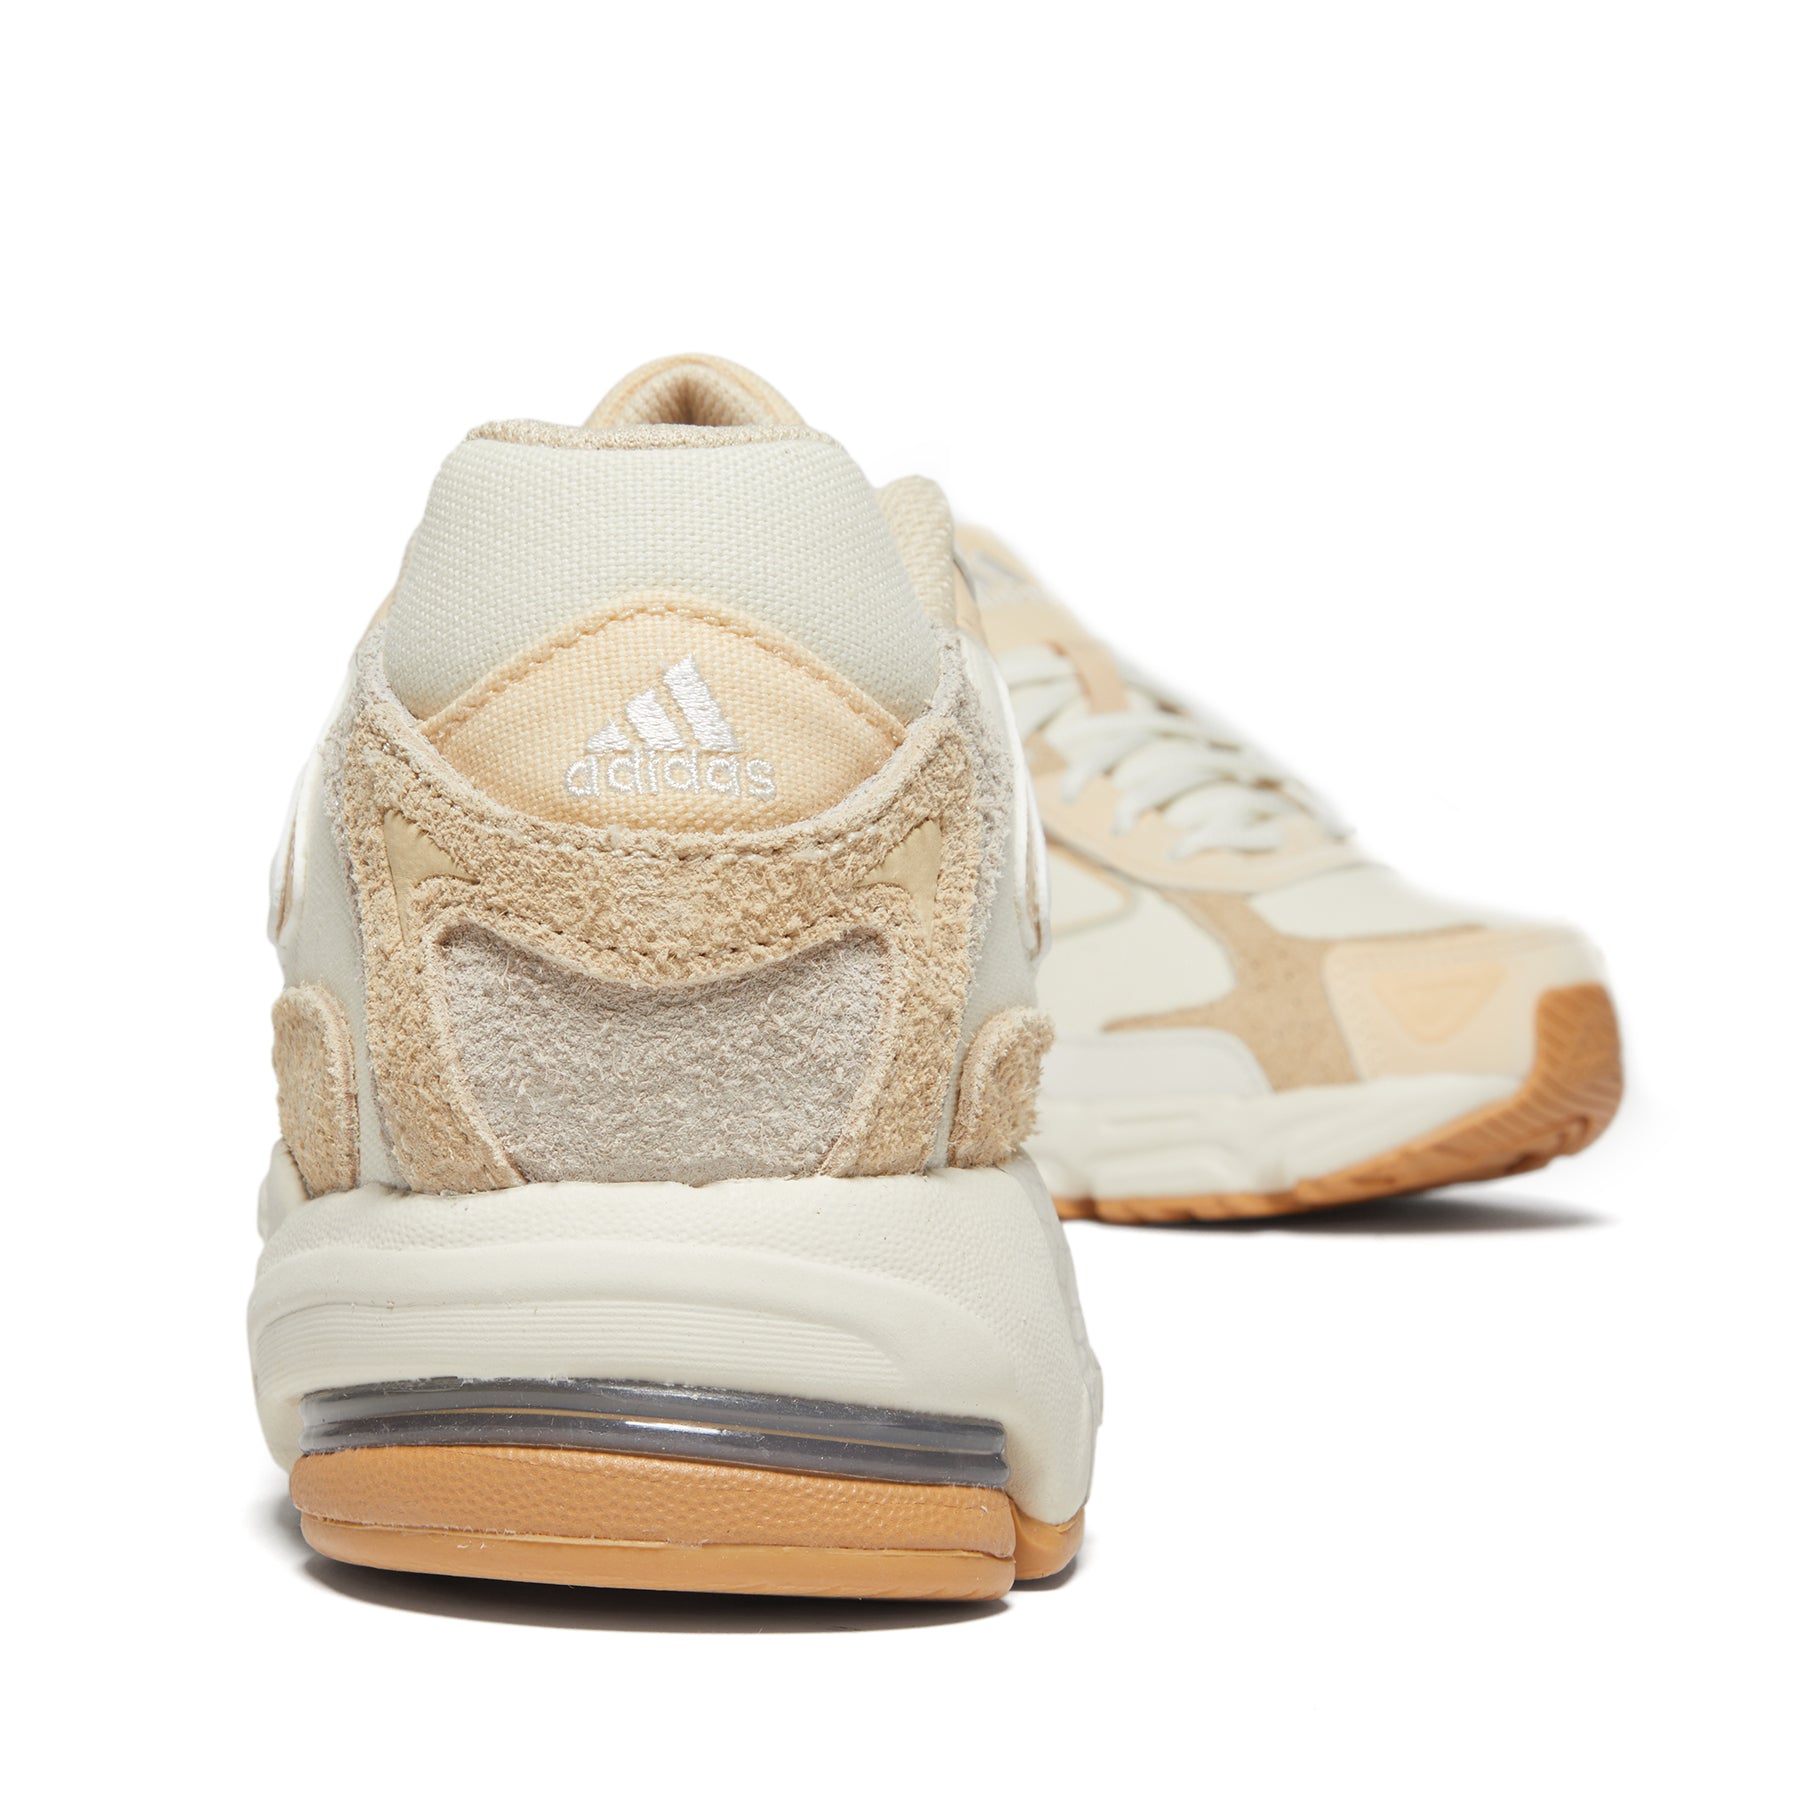 Adidas White/Gum) – Concepts Womens CL Response (Off